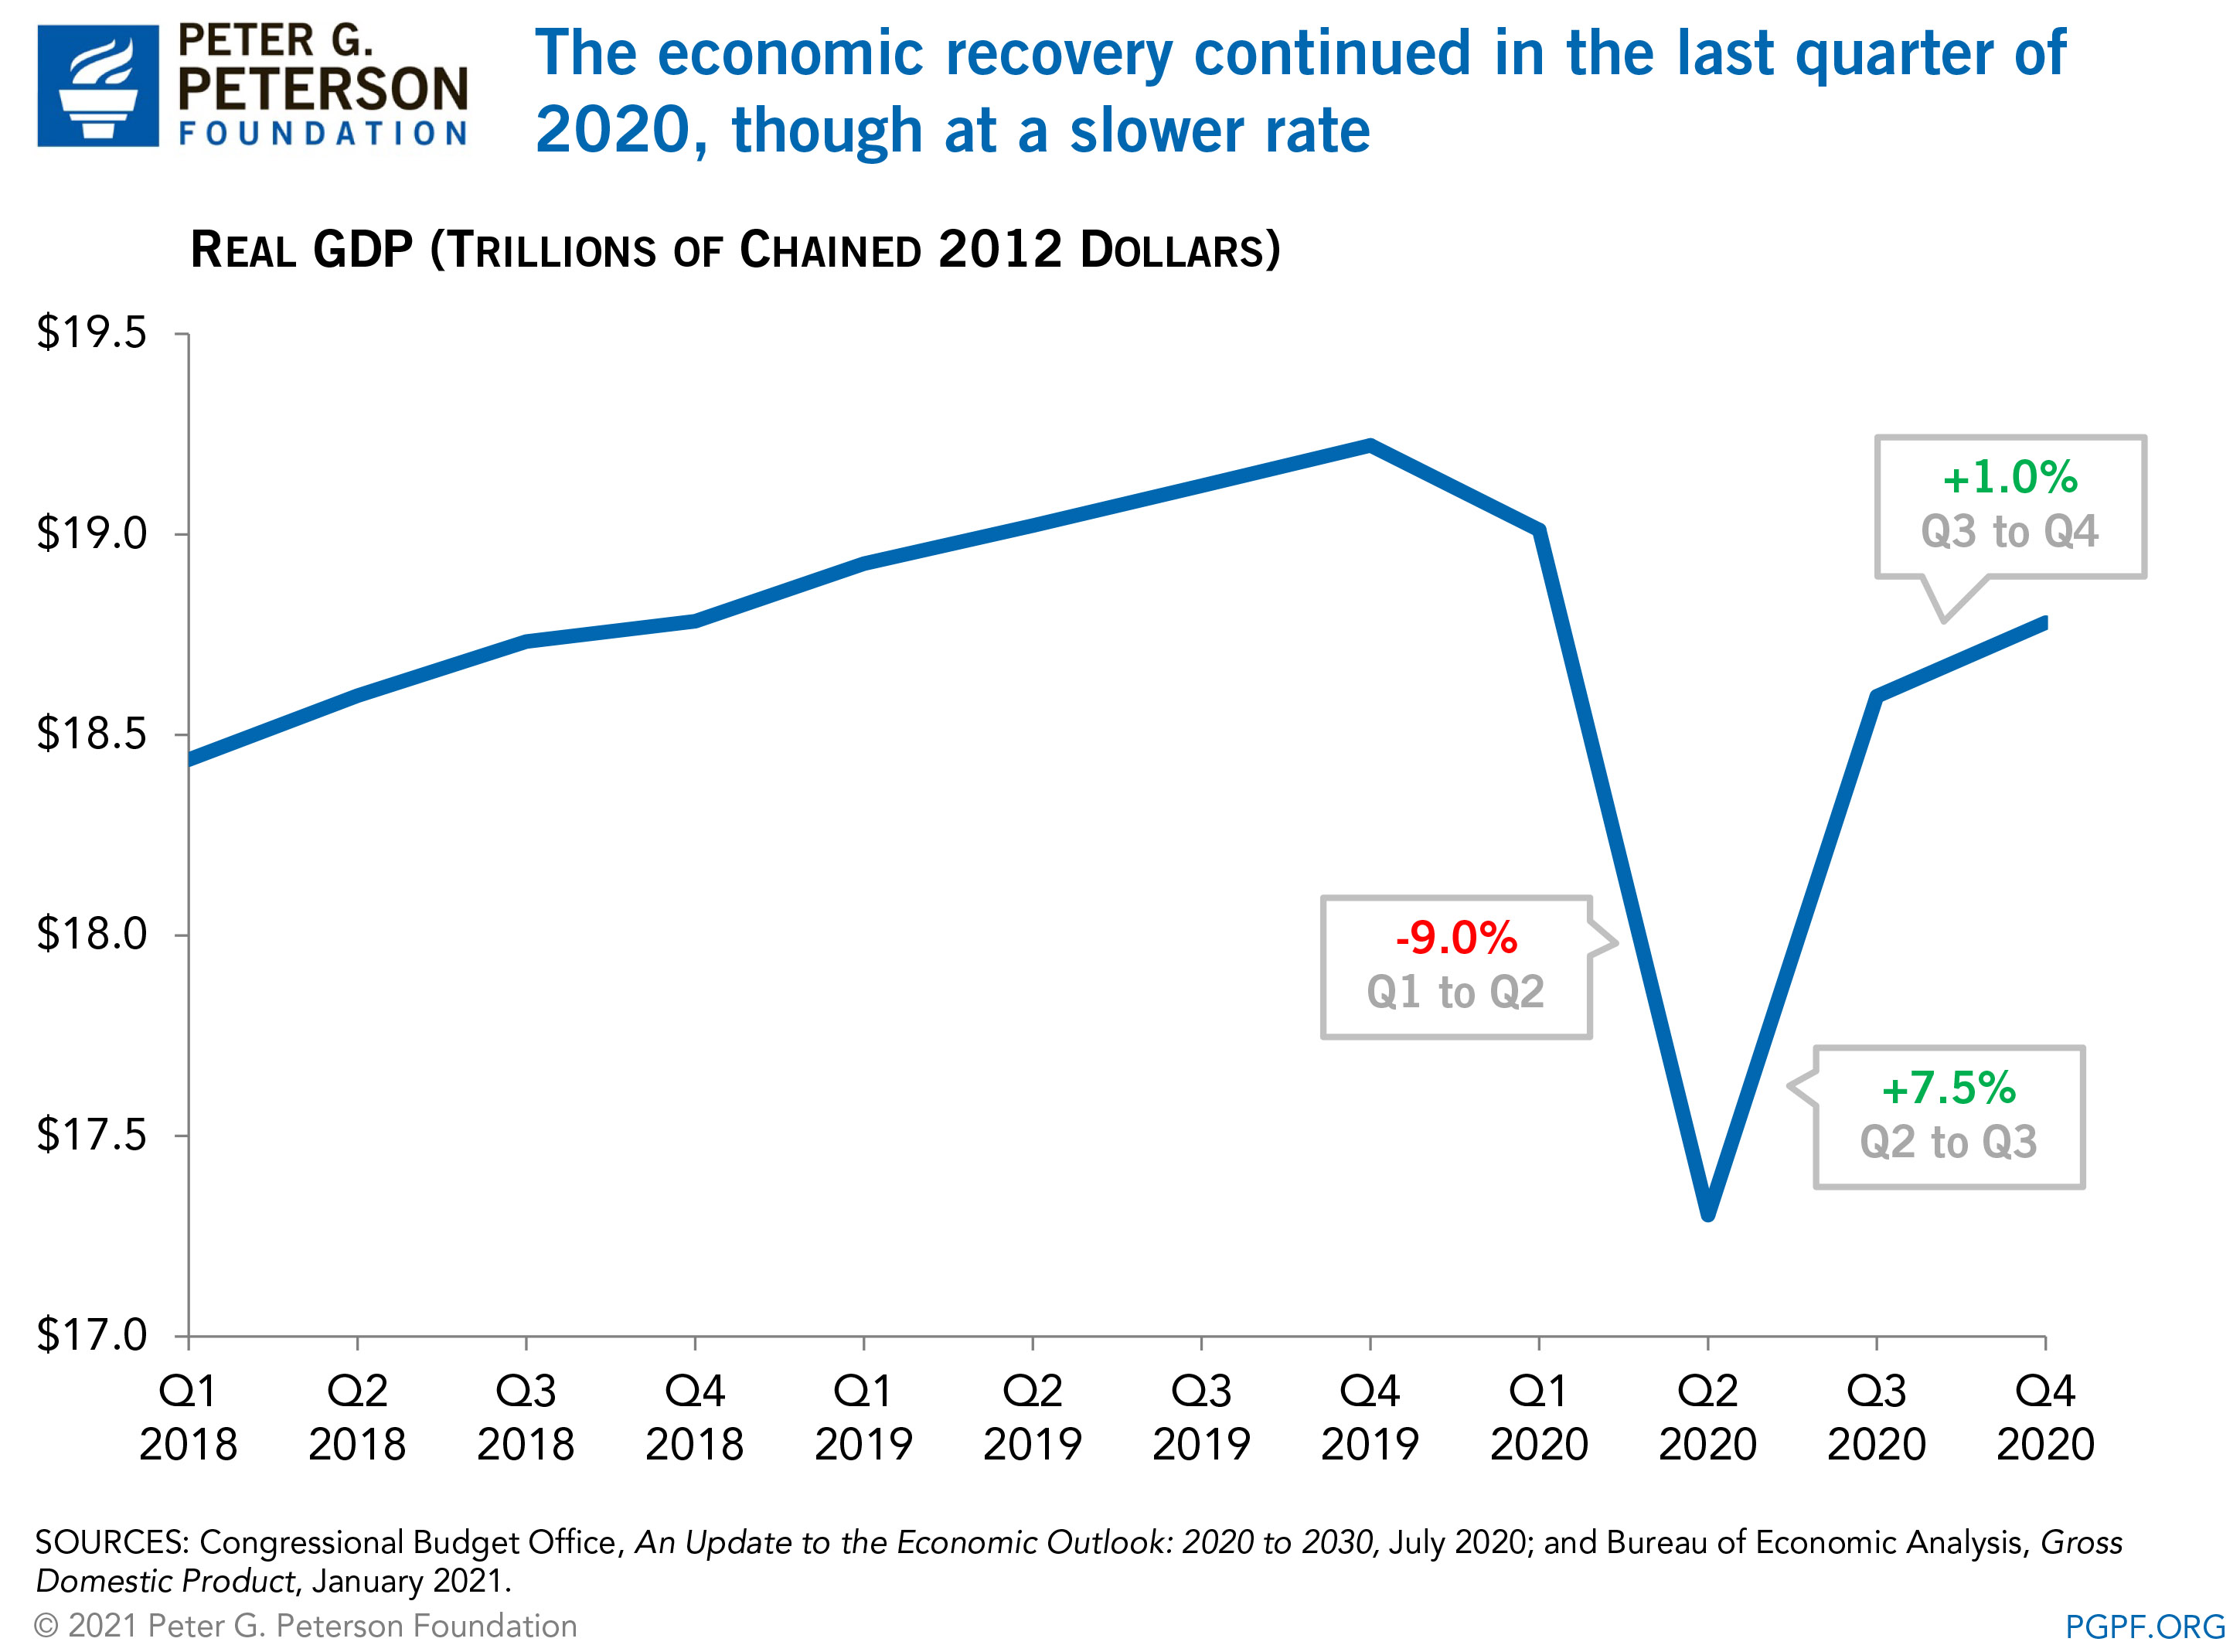 The economic recovery continued in the last quarter of 2020, though at a slower rate